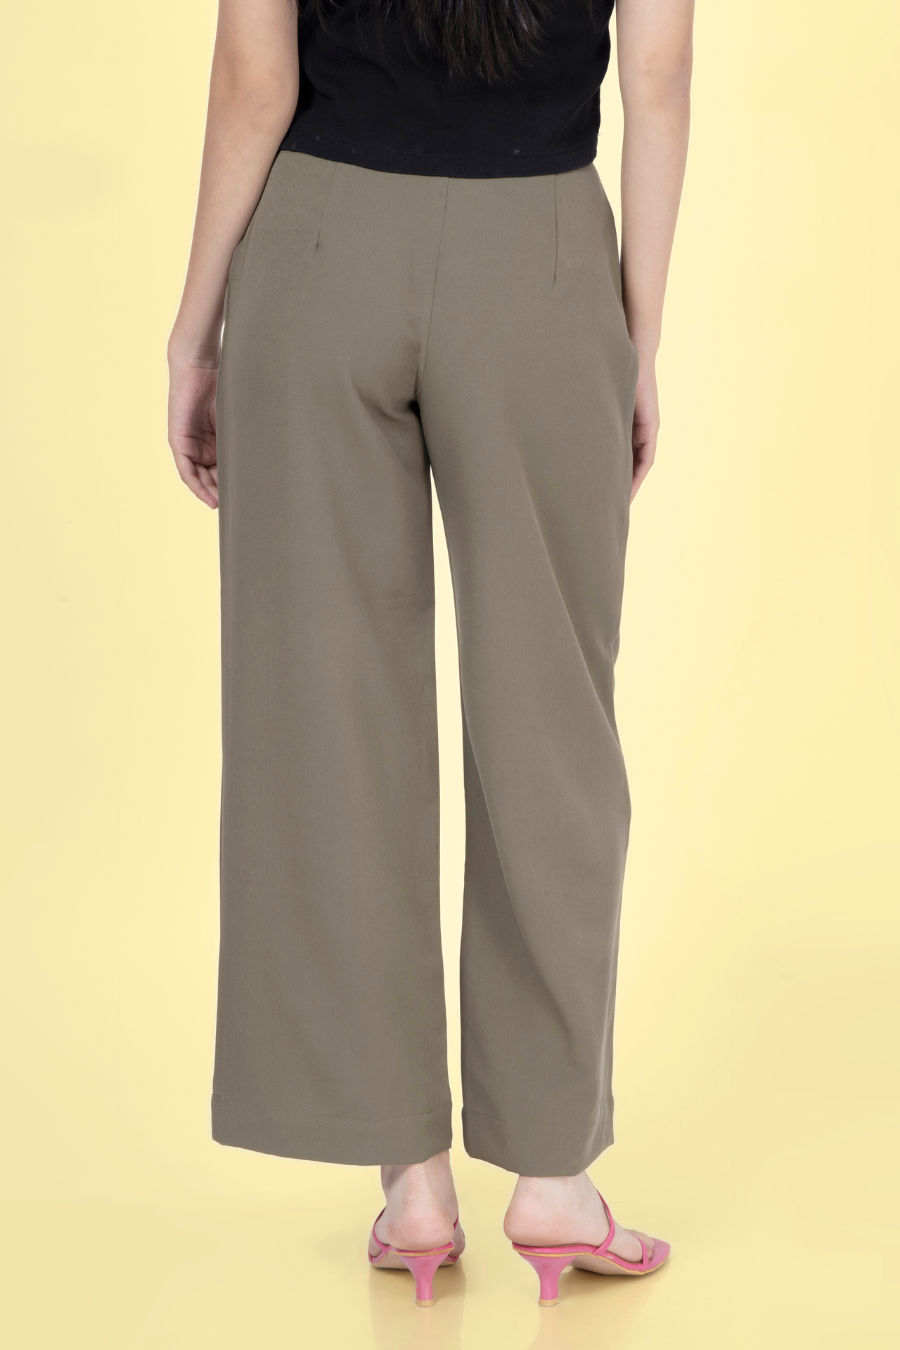 'Amelia' Formal Trousers Sewing Pattern